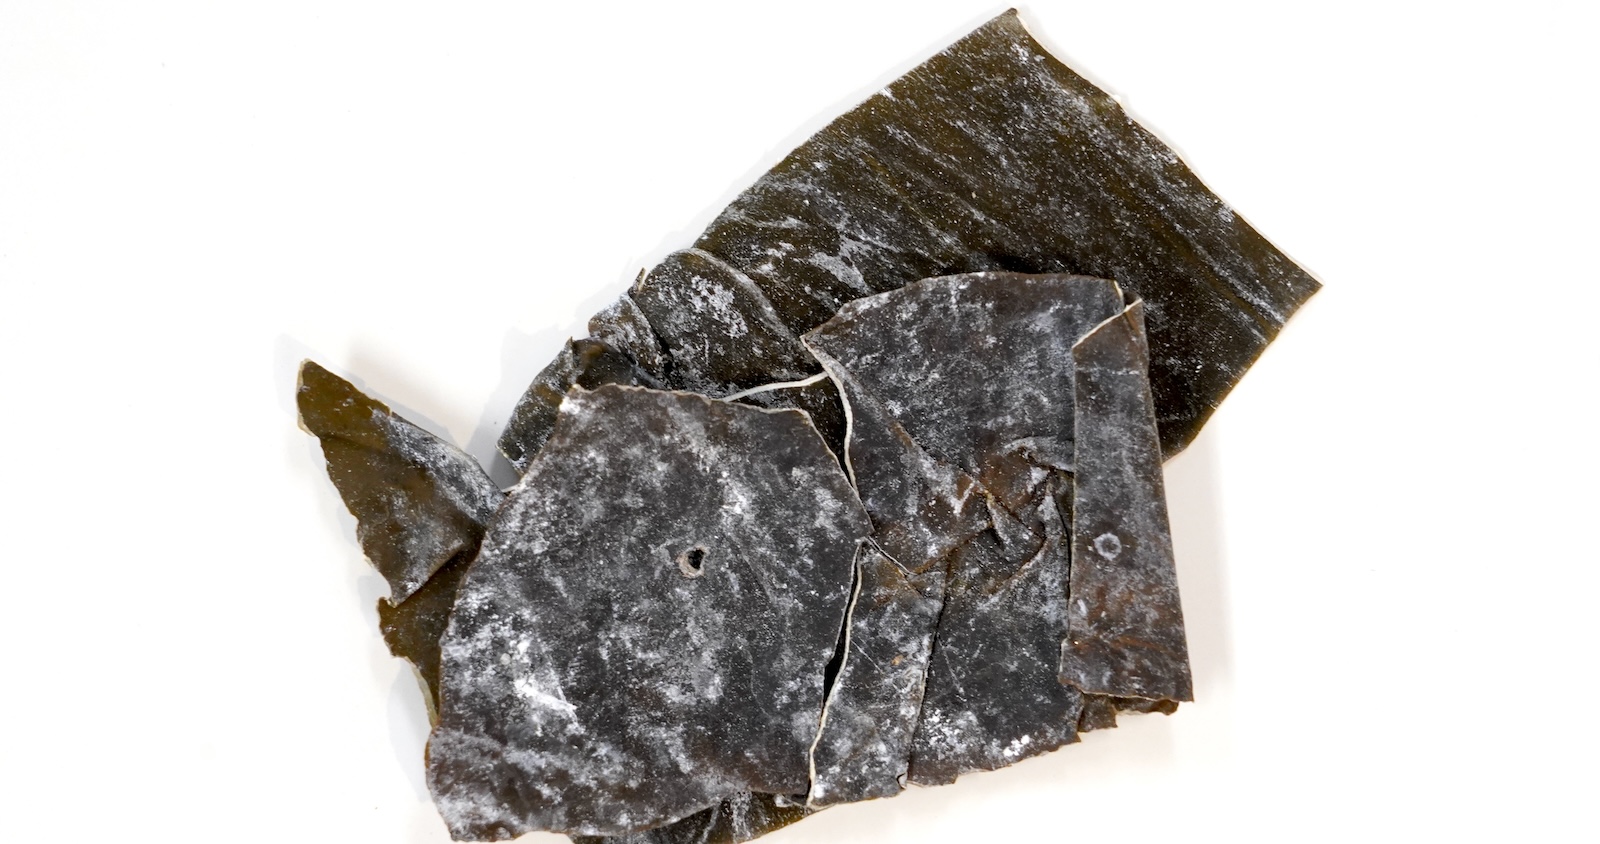 Two pieces of dried kombu on a white background